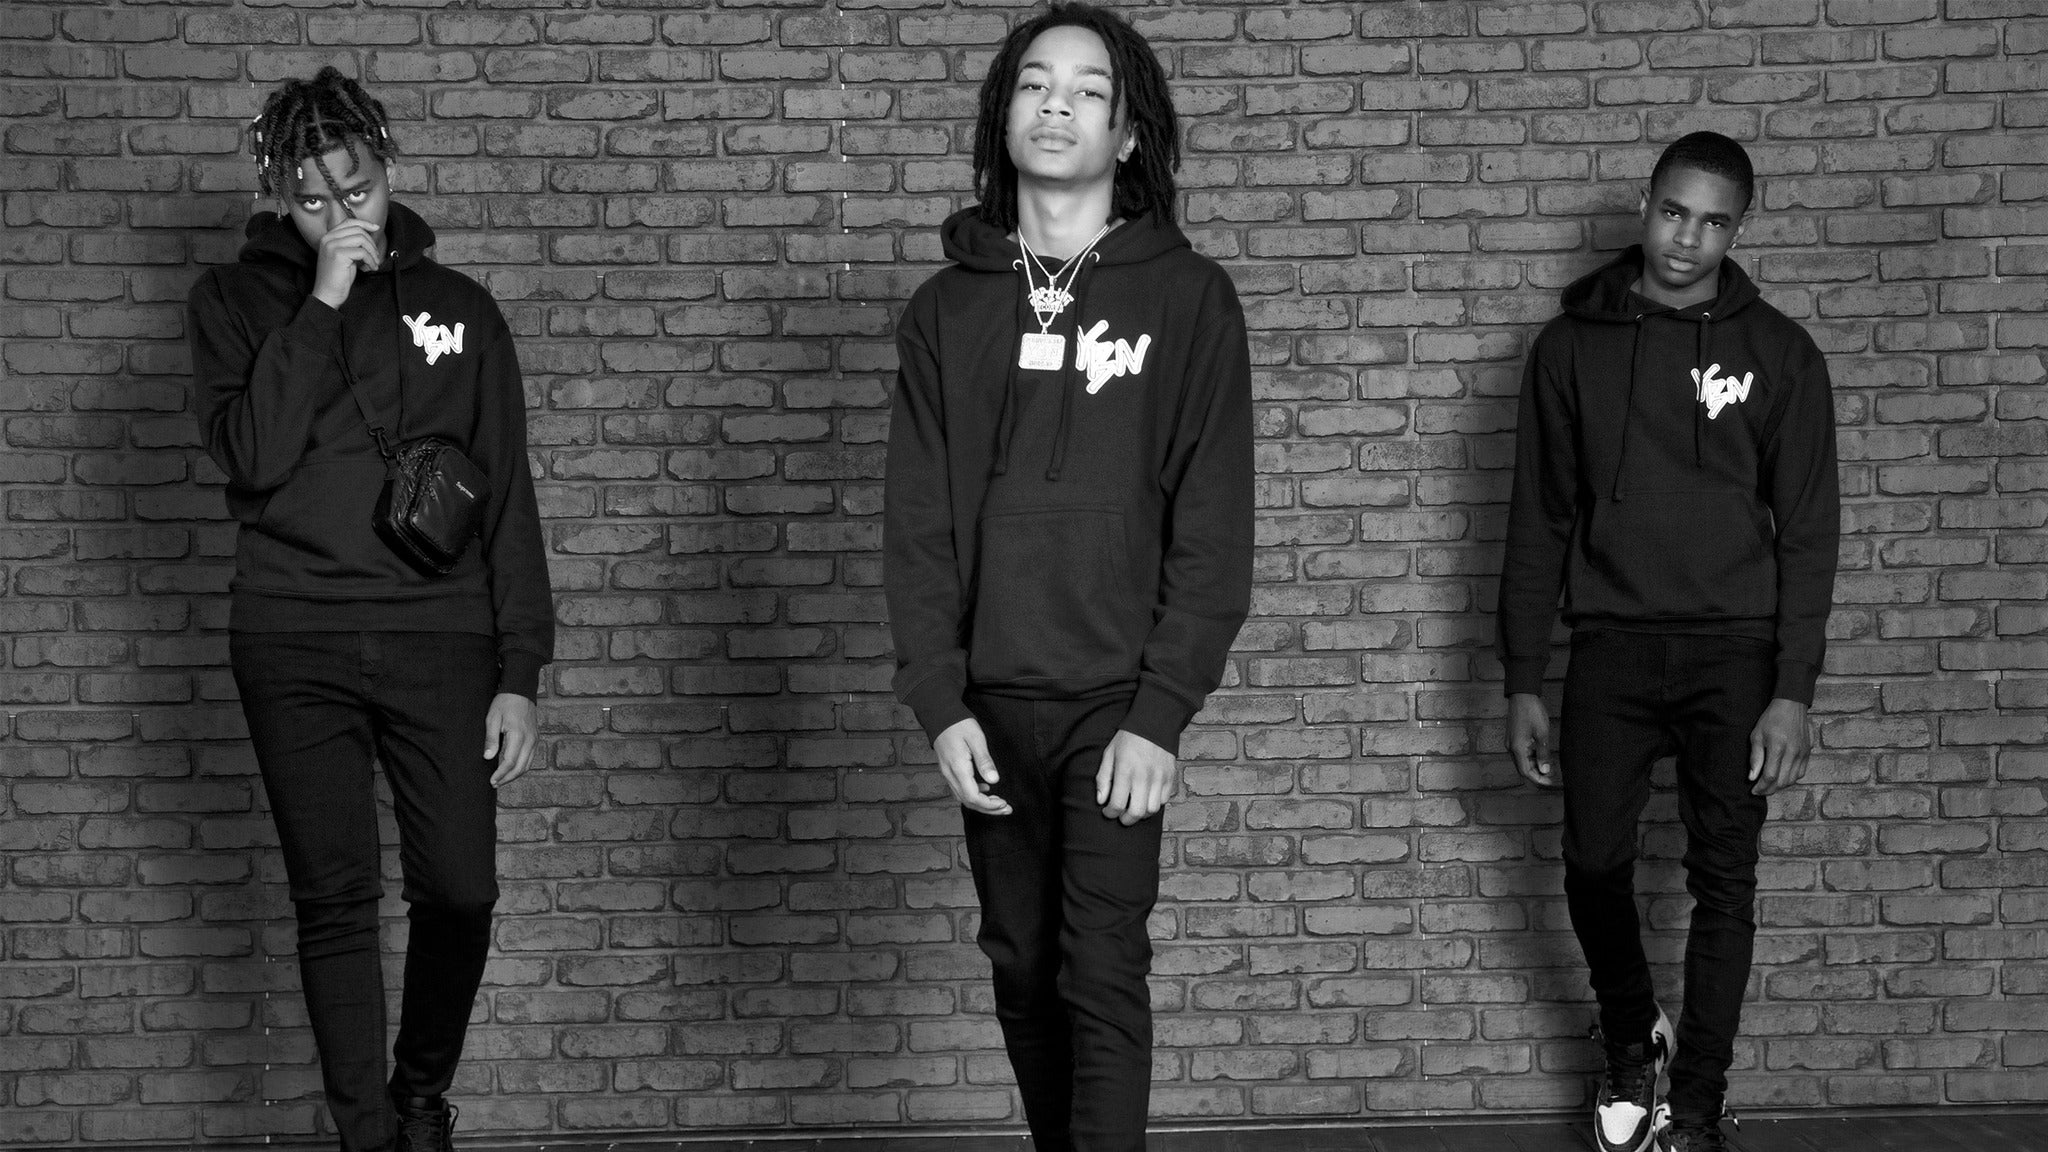 The YBN Takeover Tour With YBN Nahmir, YBN Almighty Jay, YBN Cordae in Los Angeles promo photo for Live Nation Mobile App presale offer code